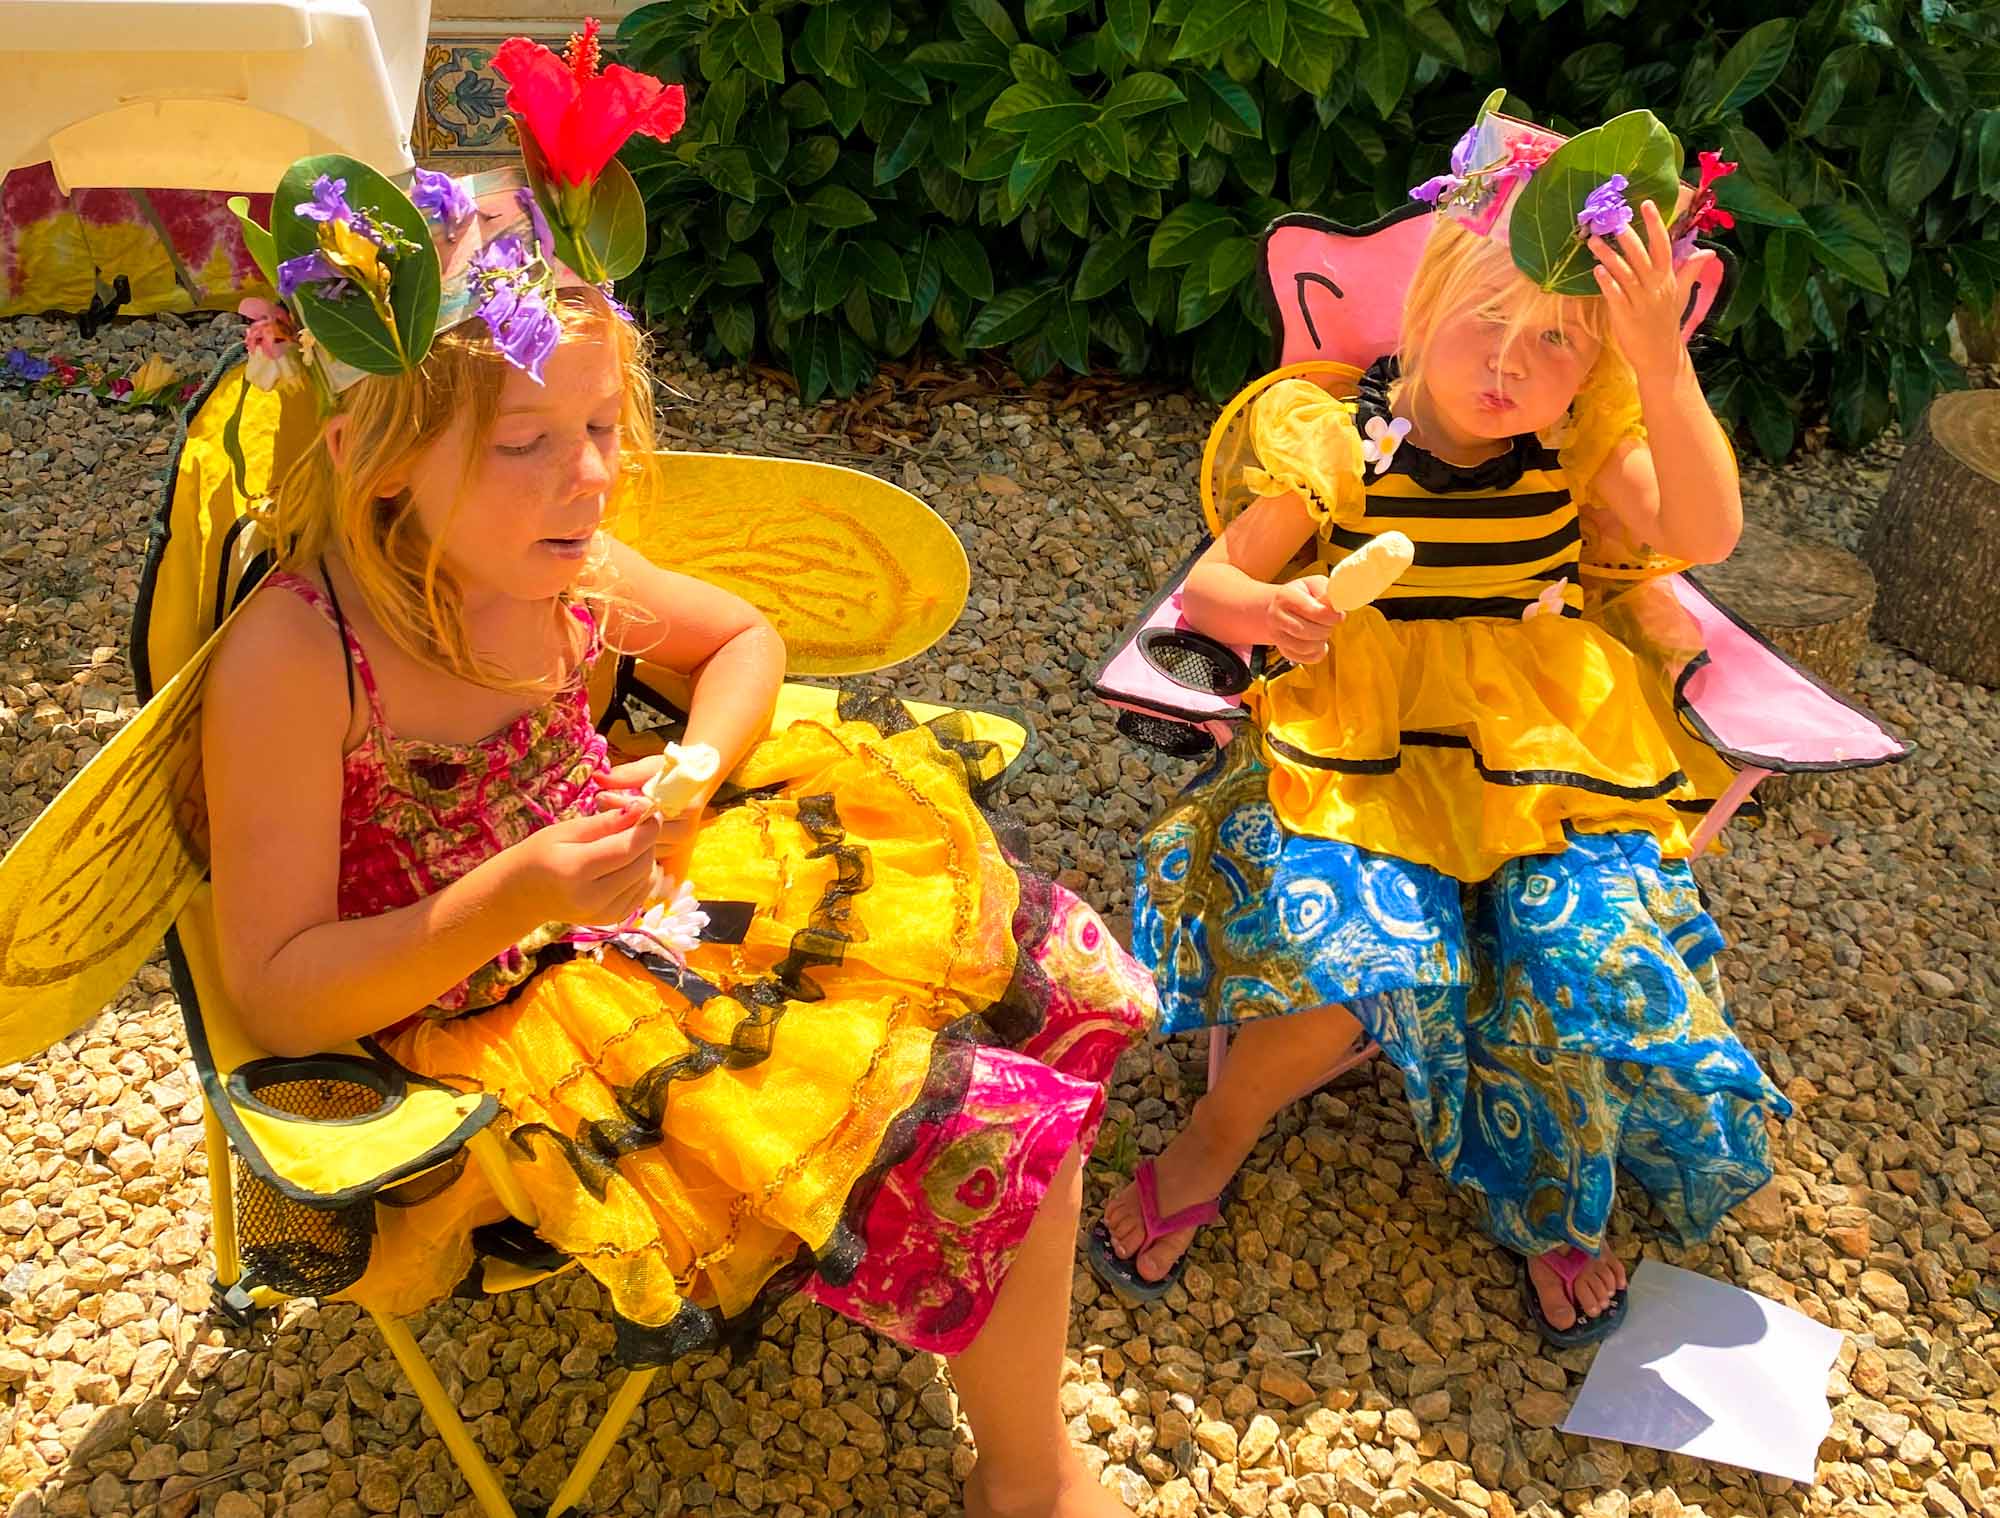 2 young girls sat wearing bee costumes and homemade flower crowns